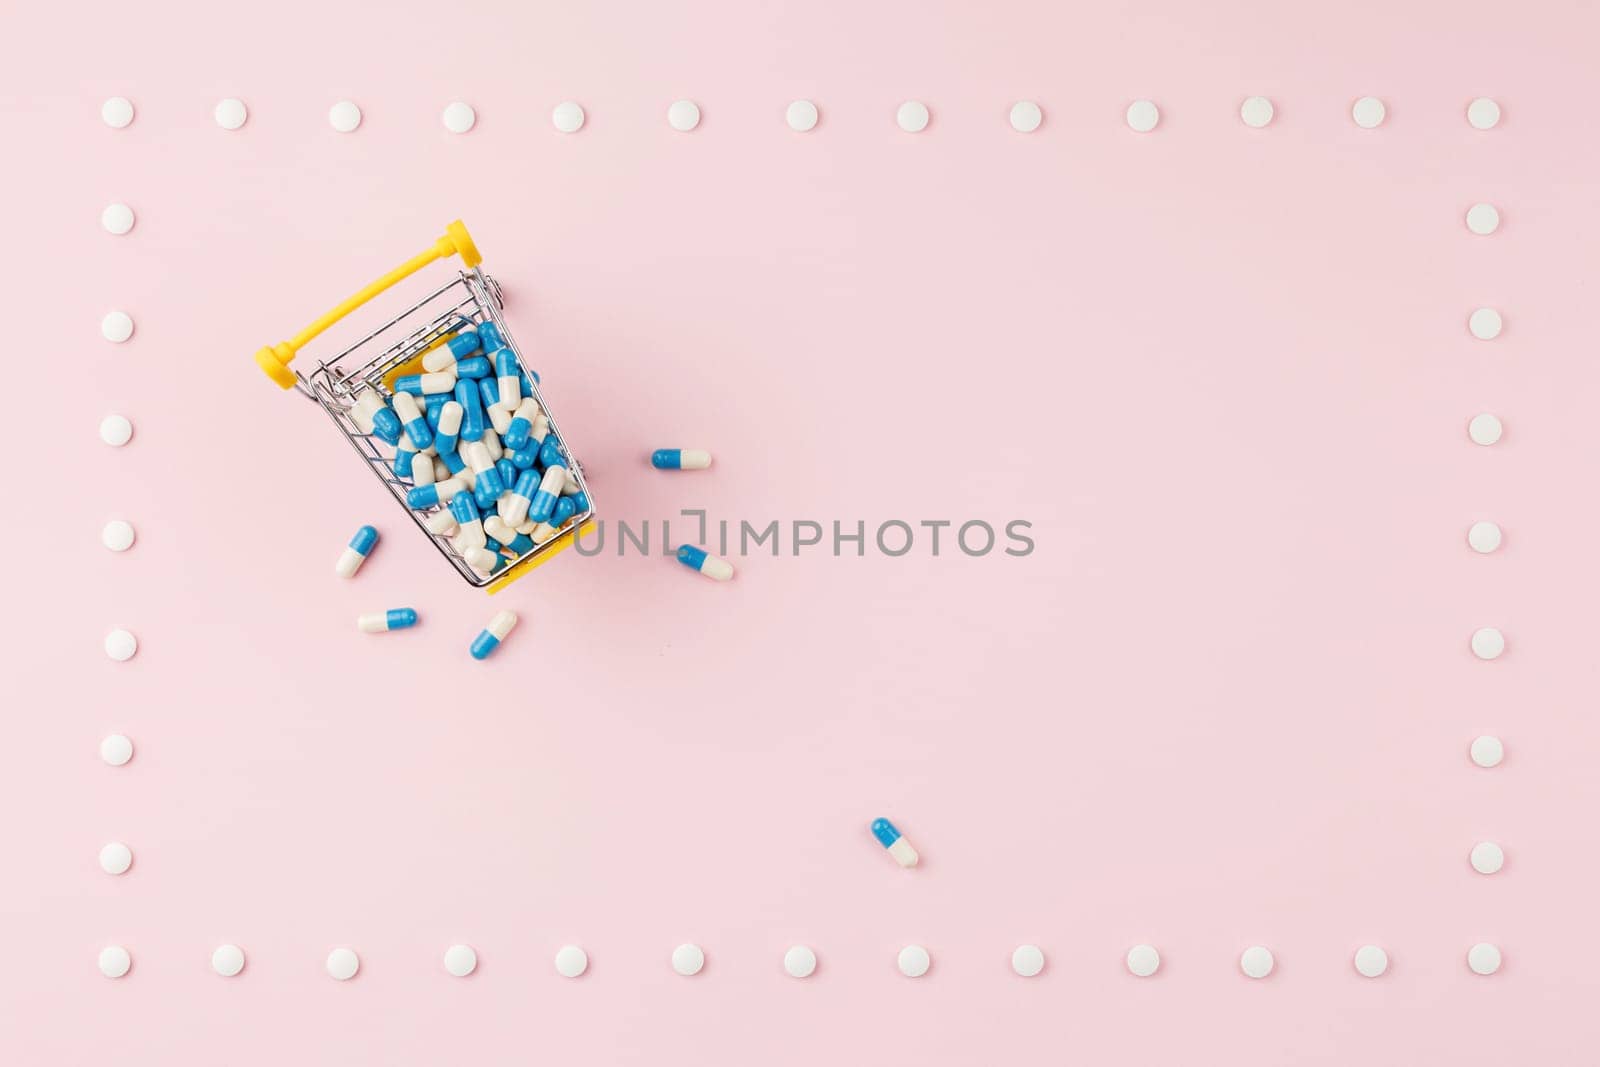 Supermarket trolley filled with capsules in a frame of pills on a pink background. Top view. Pharmacy concept.